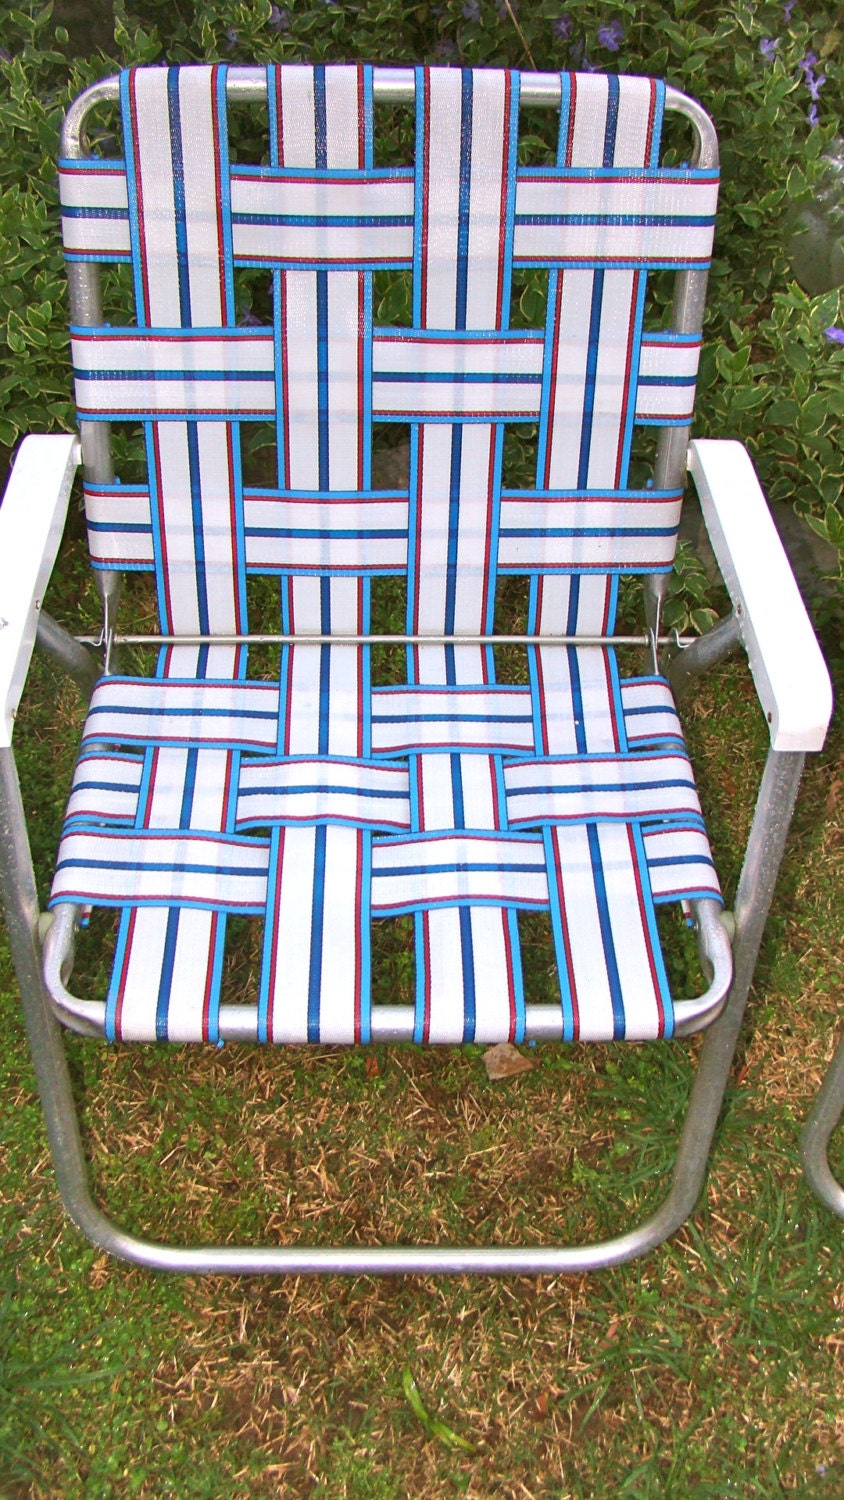 are aluminum webbed lawn chairs comfortable